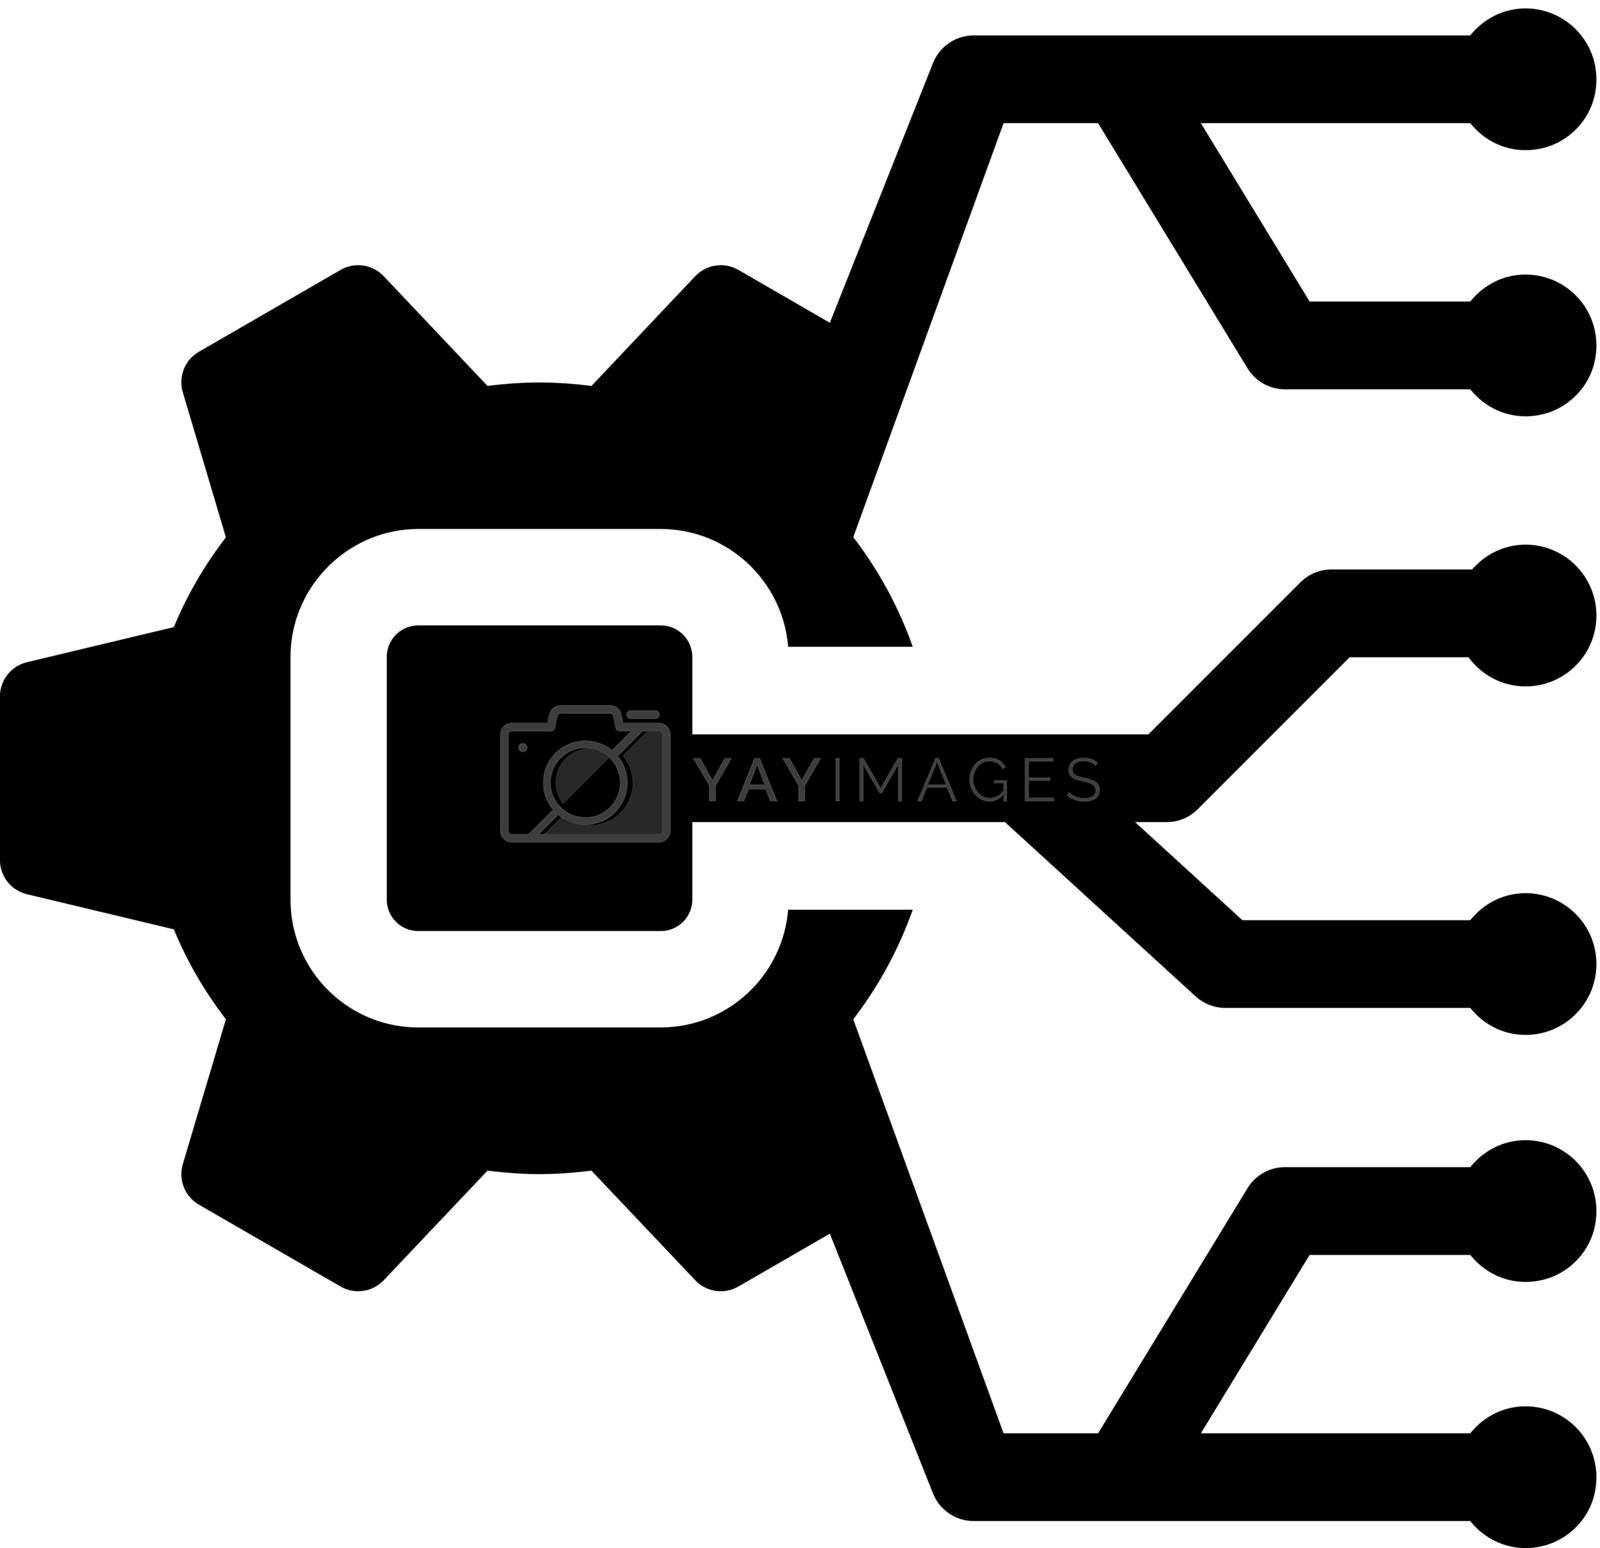 Cryptocurrency technology icon (vector illustration)